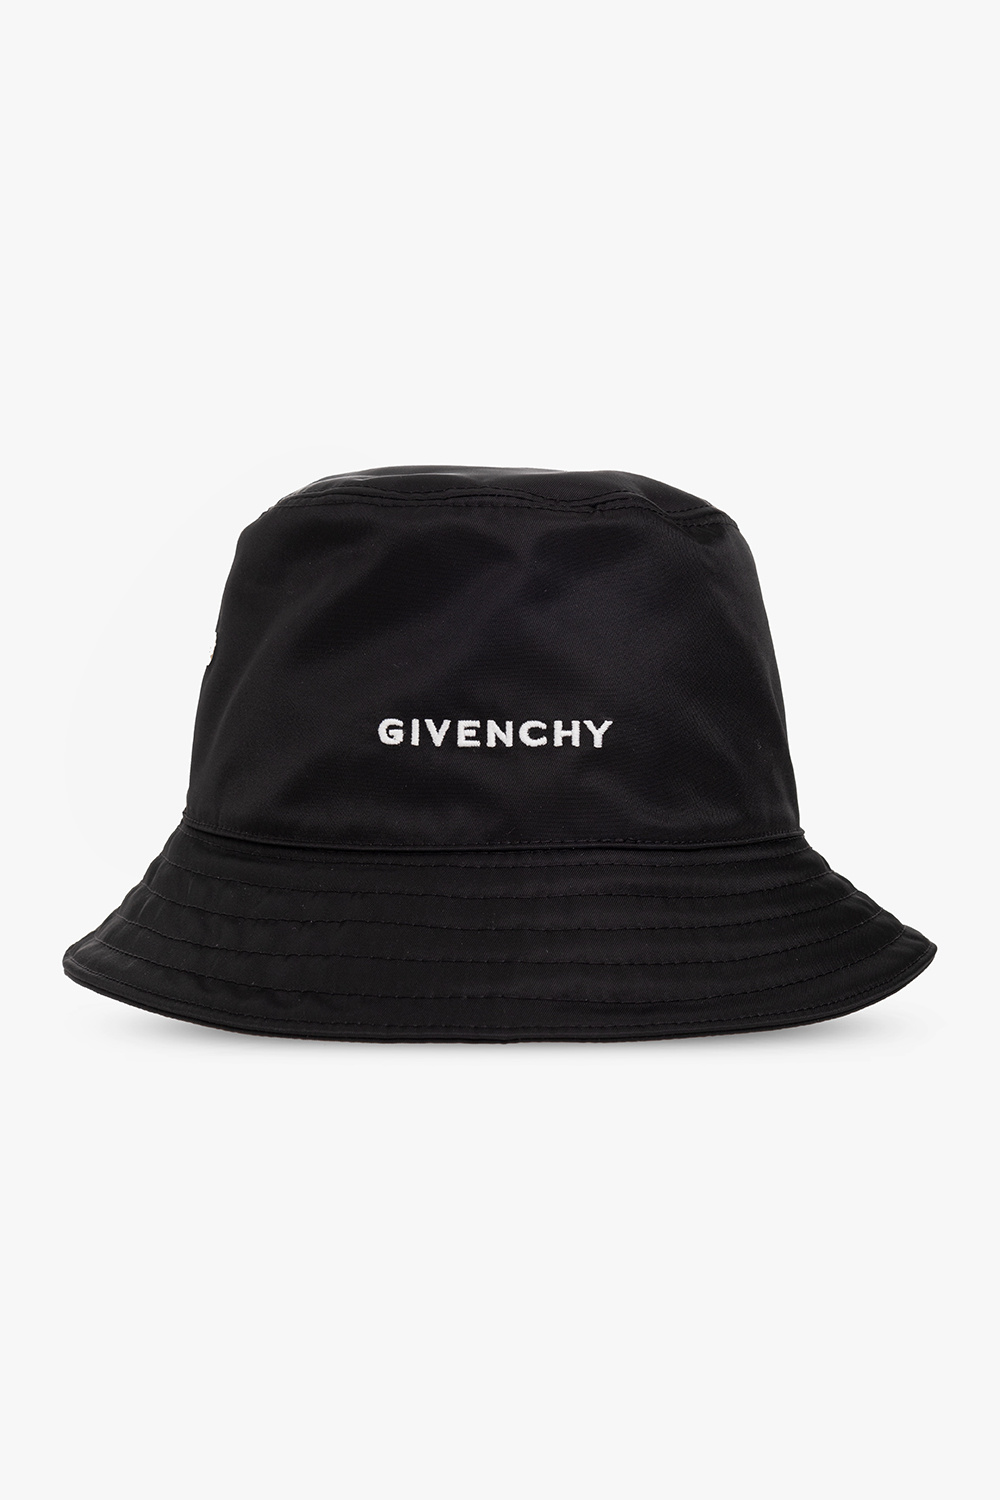 Givenchy Bucket Charlie hat with logo